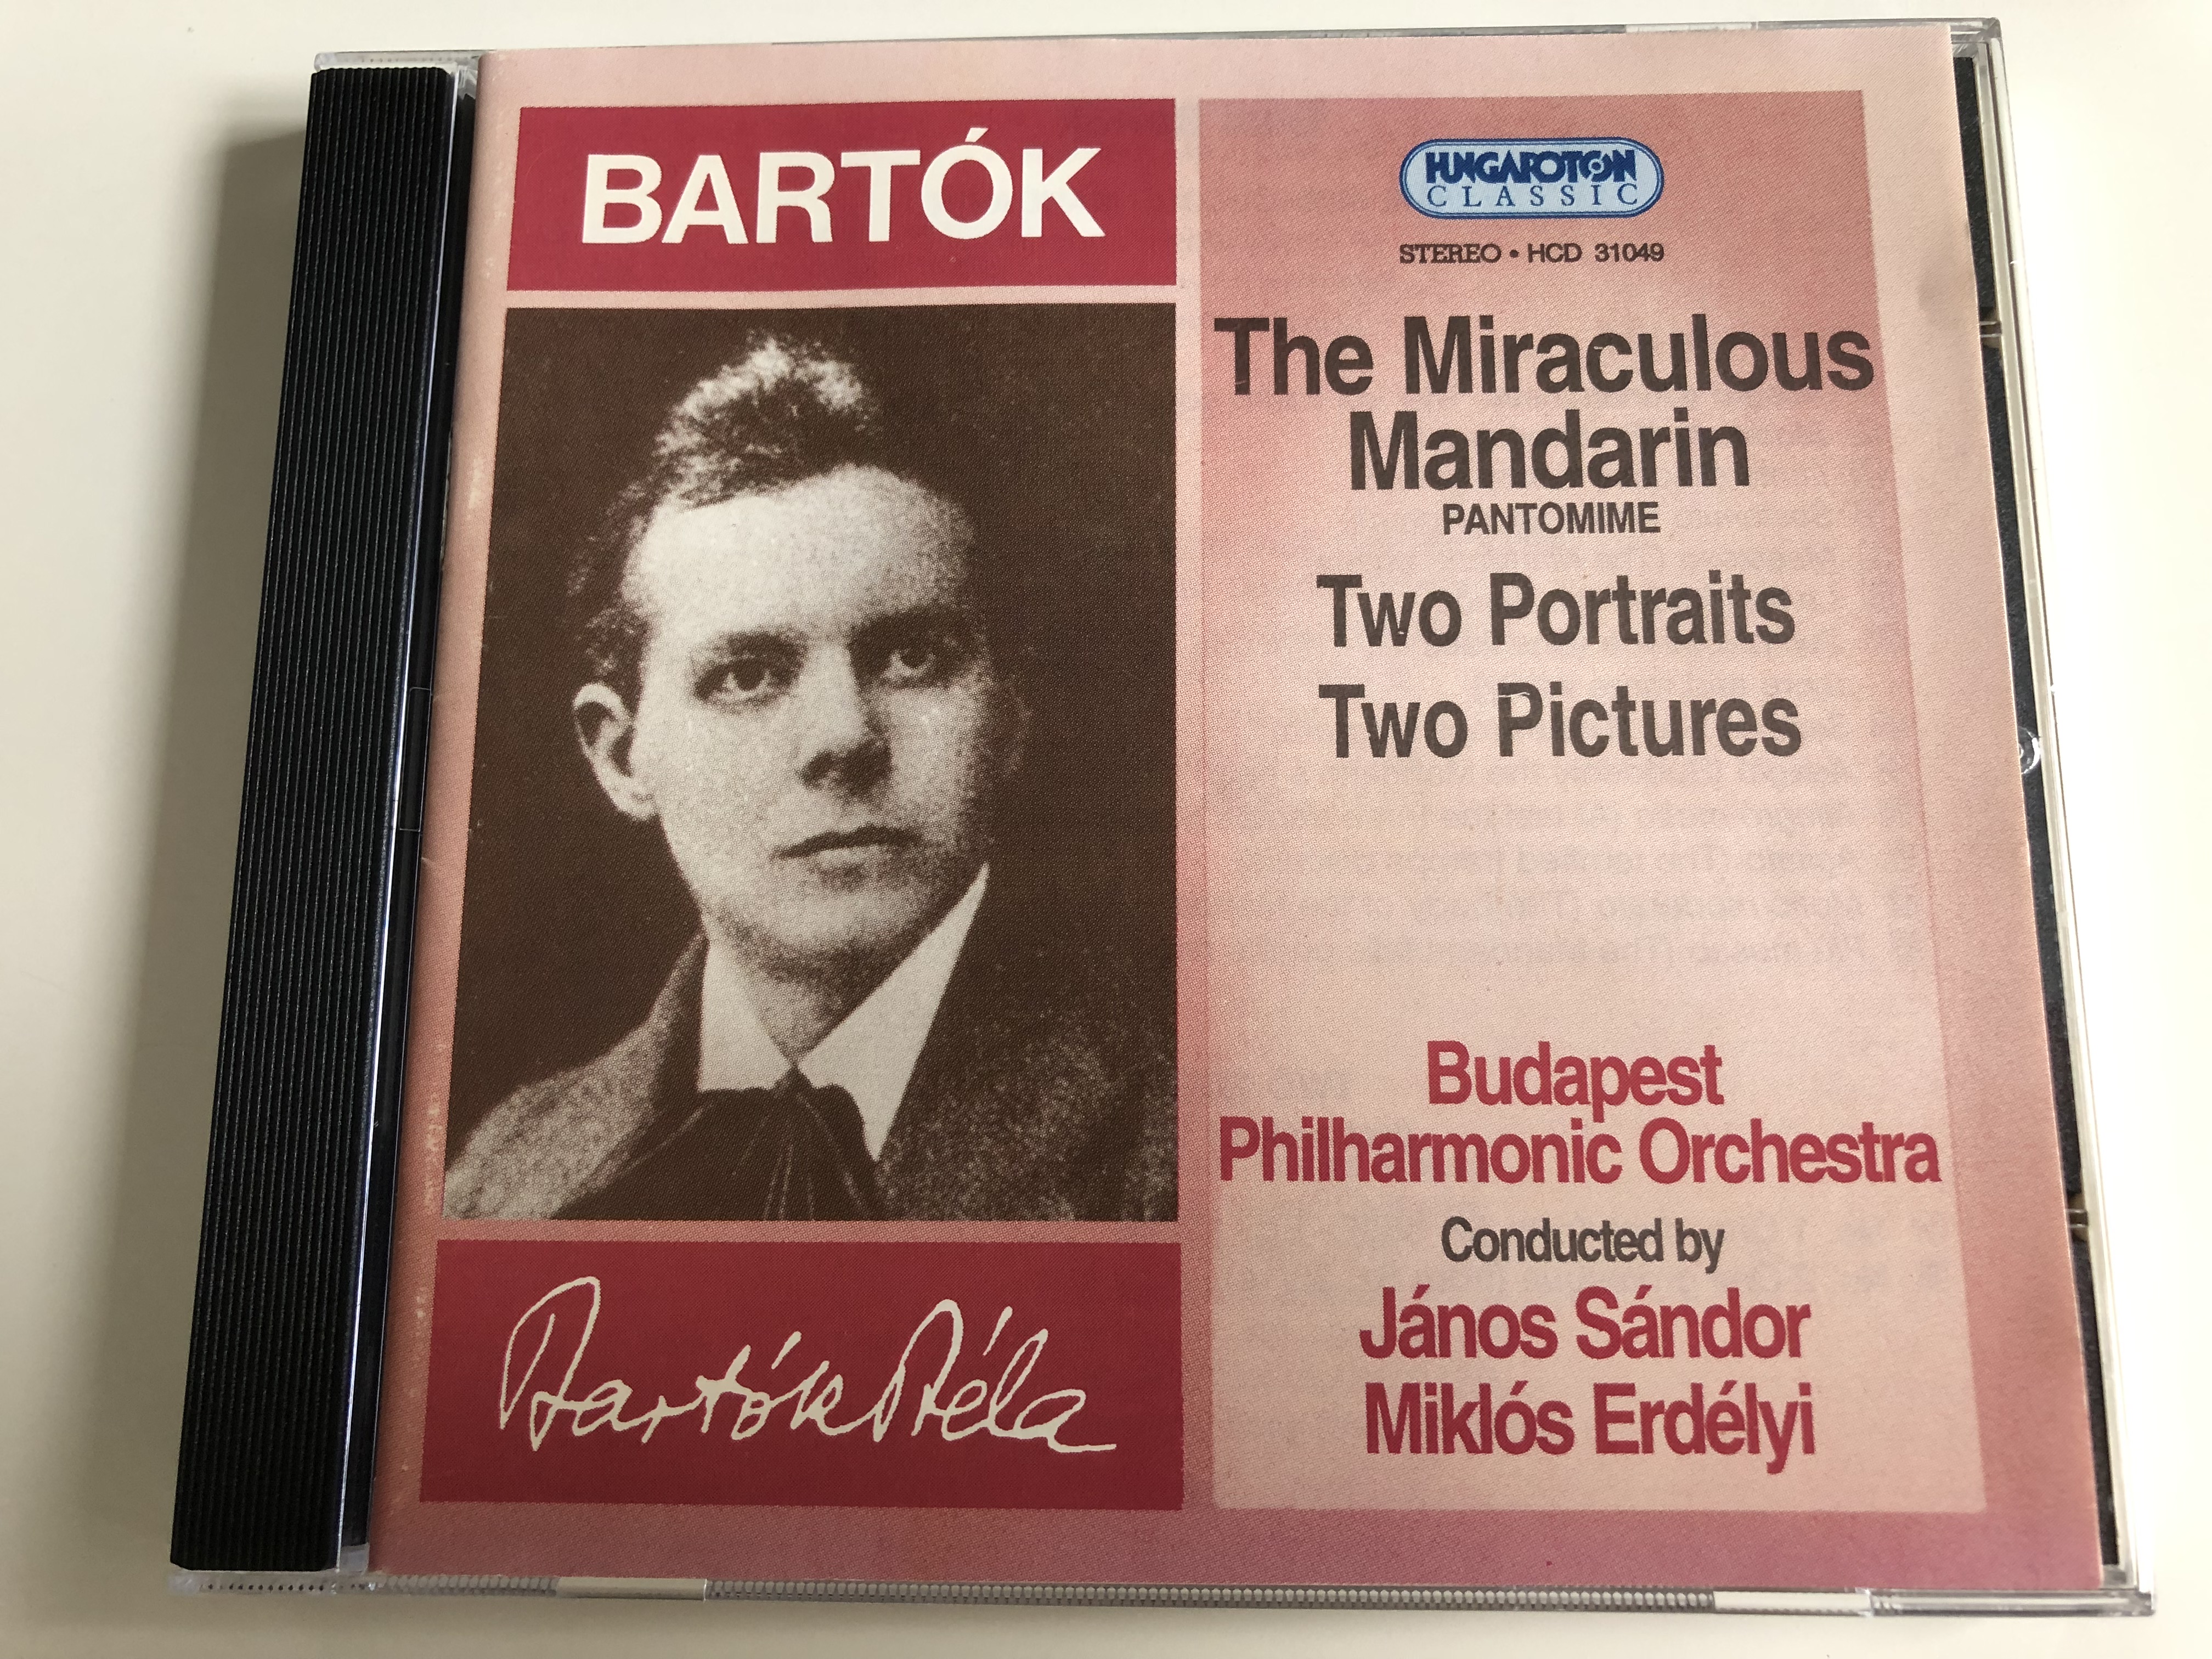 bart-k-the-miraculous-mandarine-pantomime-two-portraits-two-pictures-budapest-philharmonic-orchestra-conducted-by-j-nos-s-ndor-mikl-s-erd-lyi-hungaroton-hcd-31049-audio-cd-1994-1-.jpg